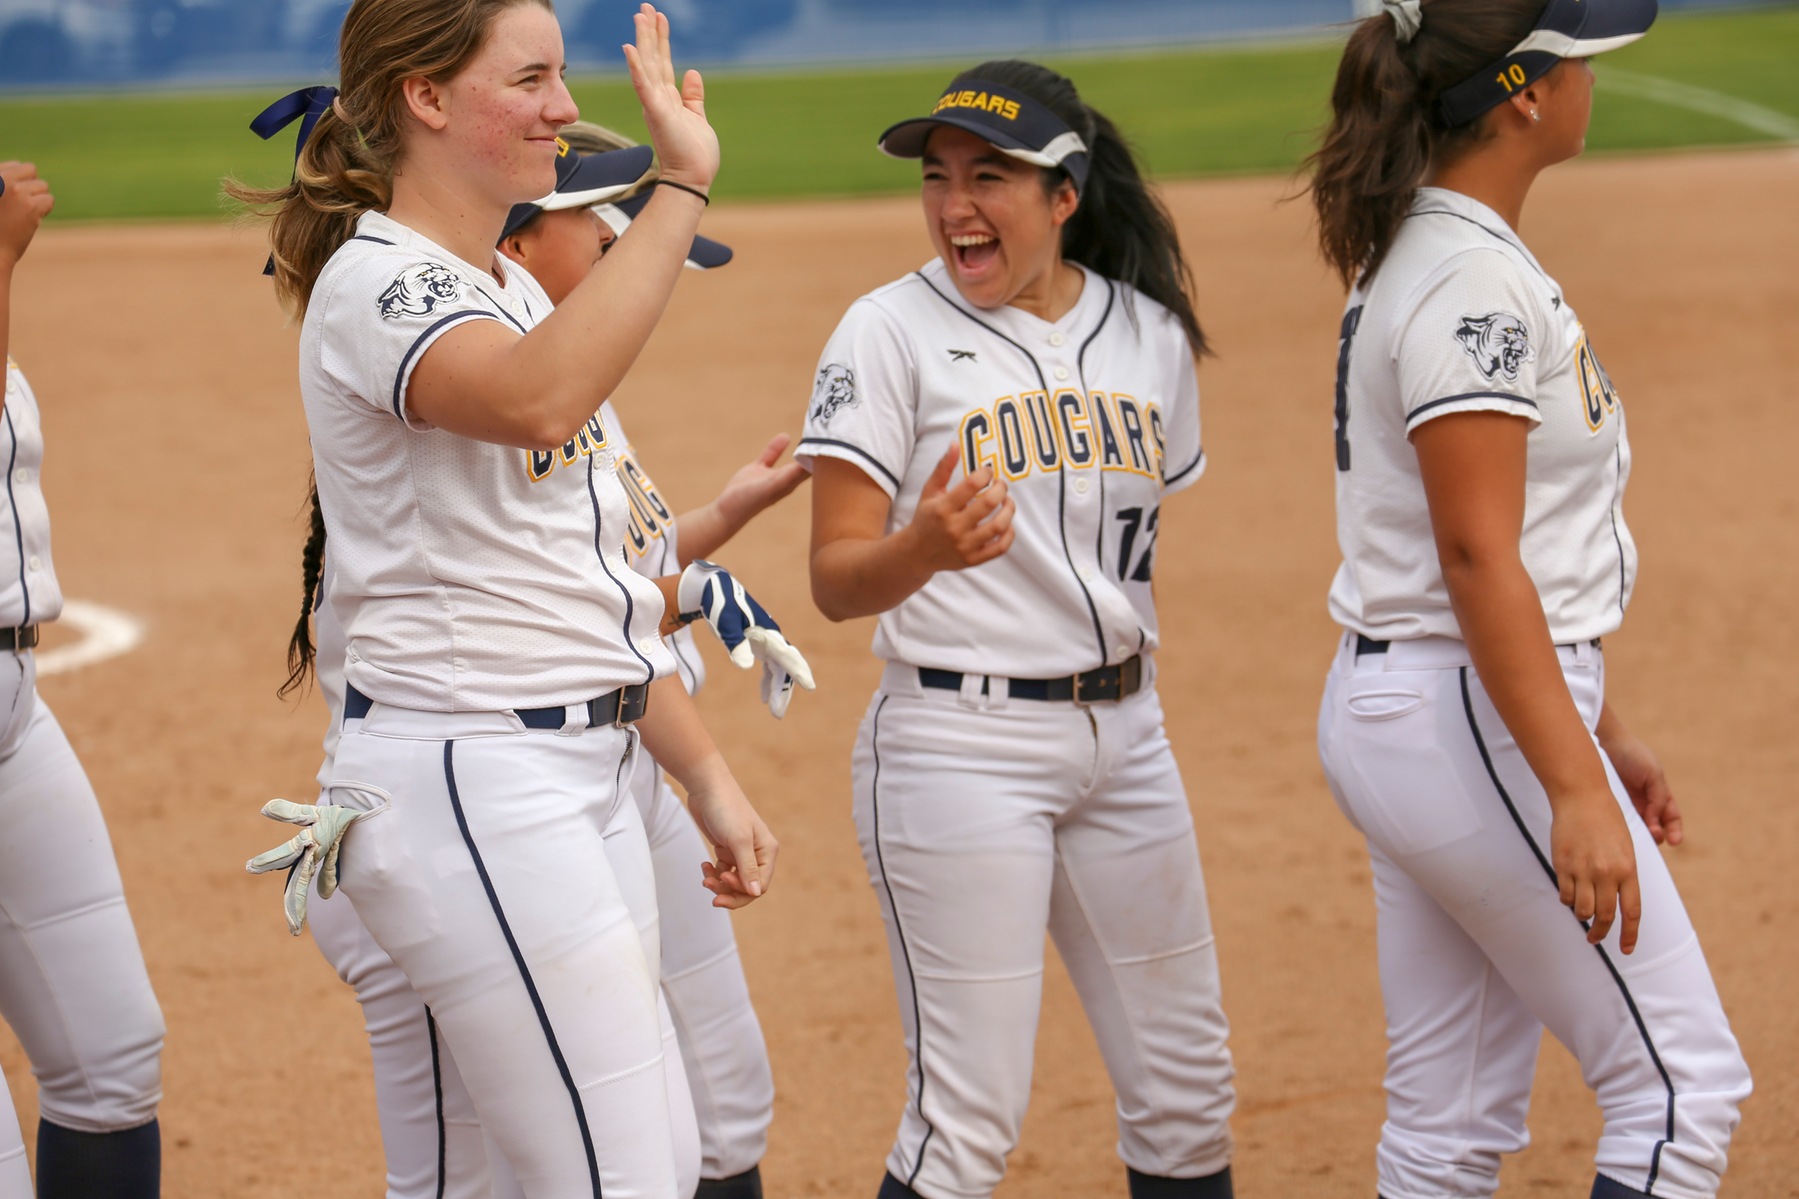 College of the Canyons softball players celebrate after a game.